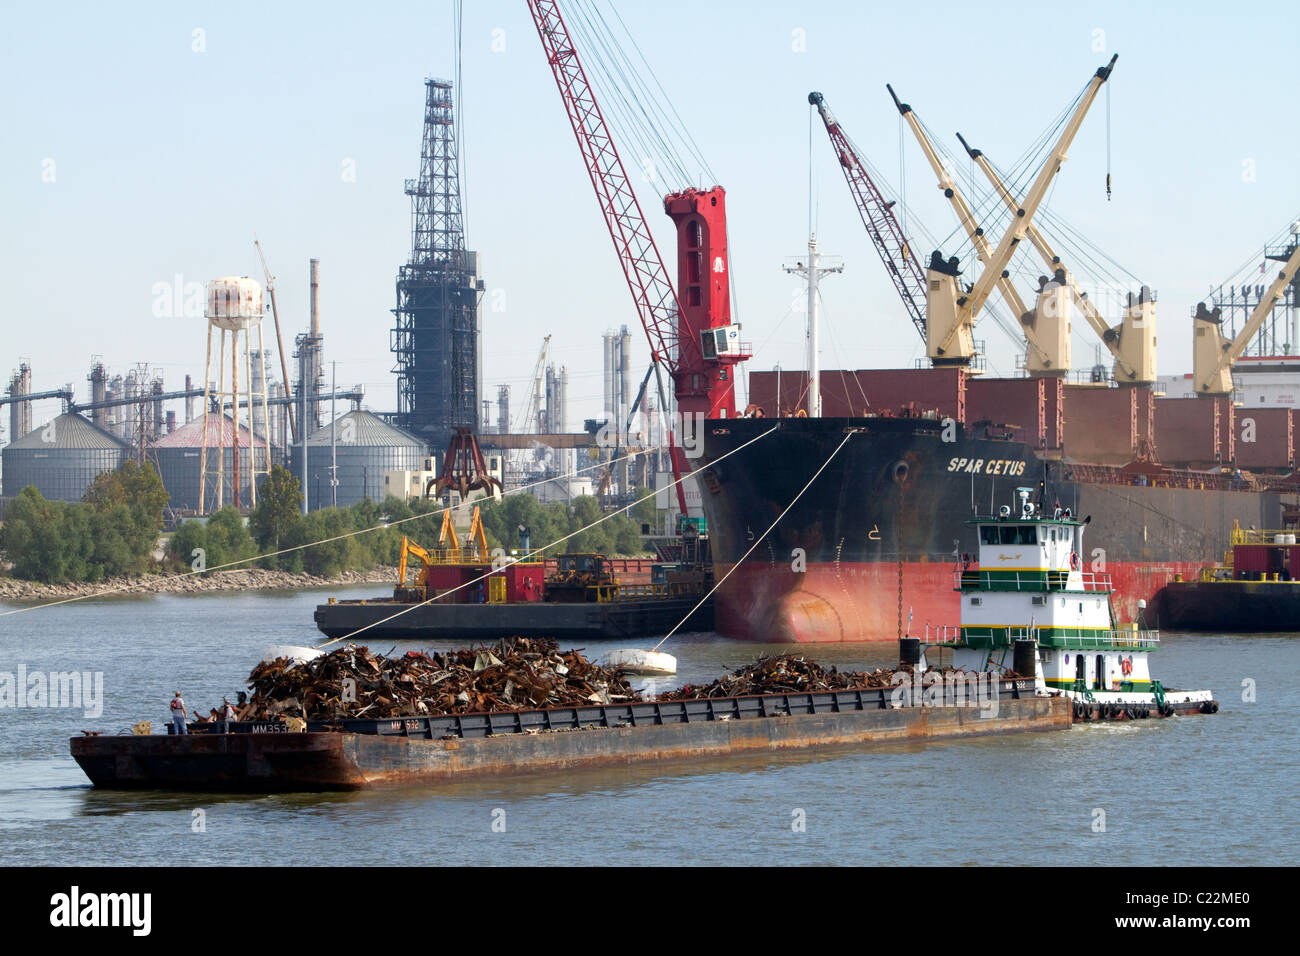 Tug boat moving a barge filled with scrap metal on the Mississippi River at New Orleans, Louisiana, USA. Stock Photo